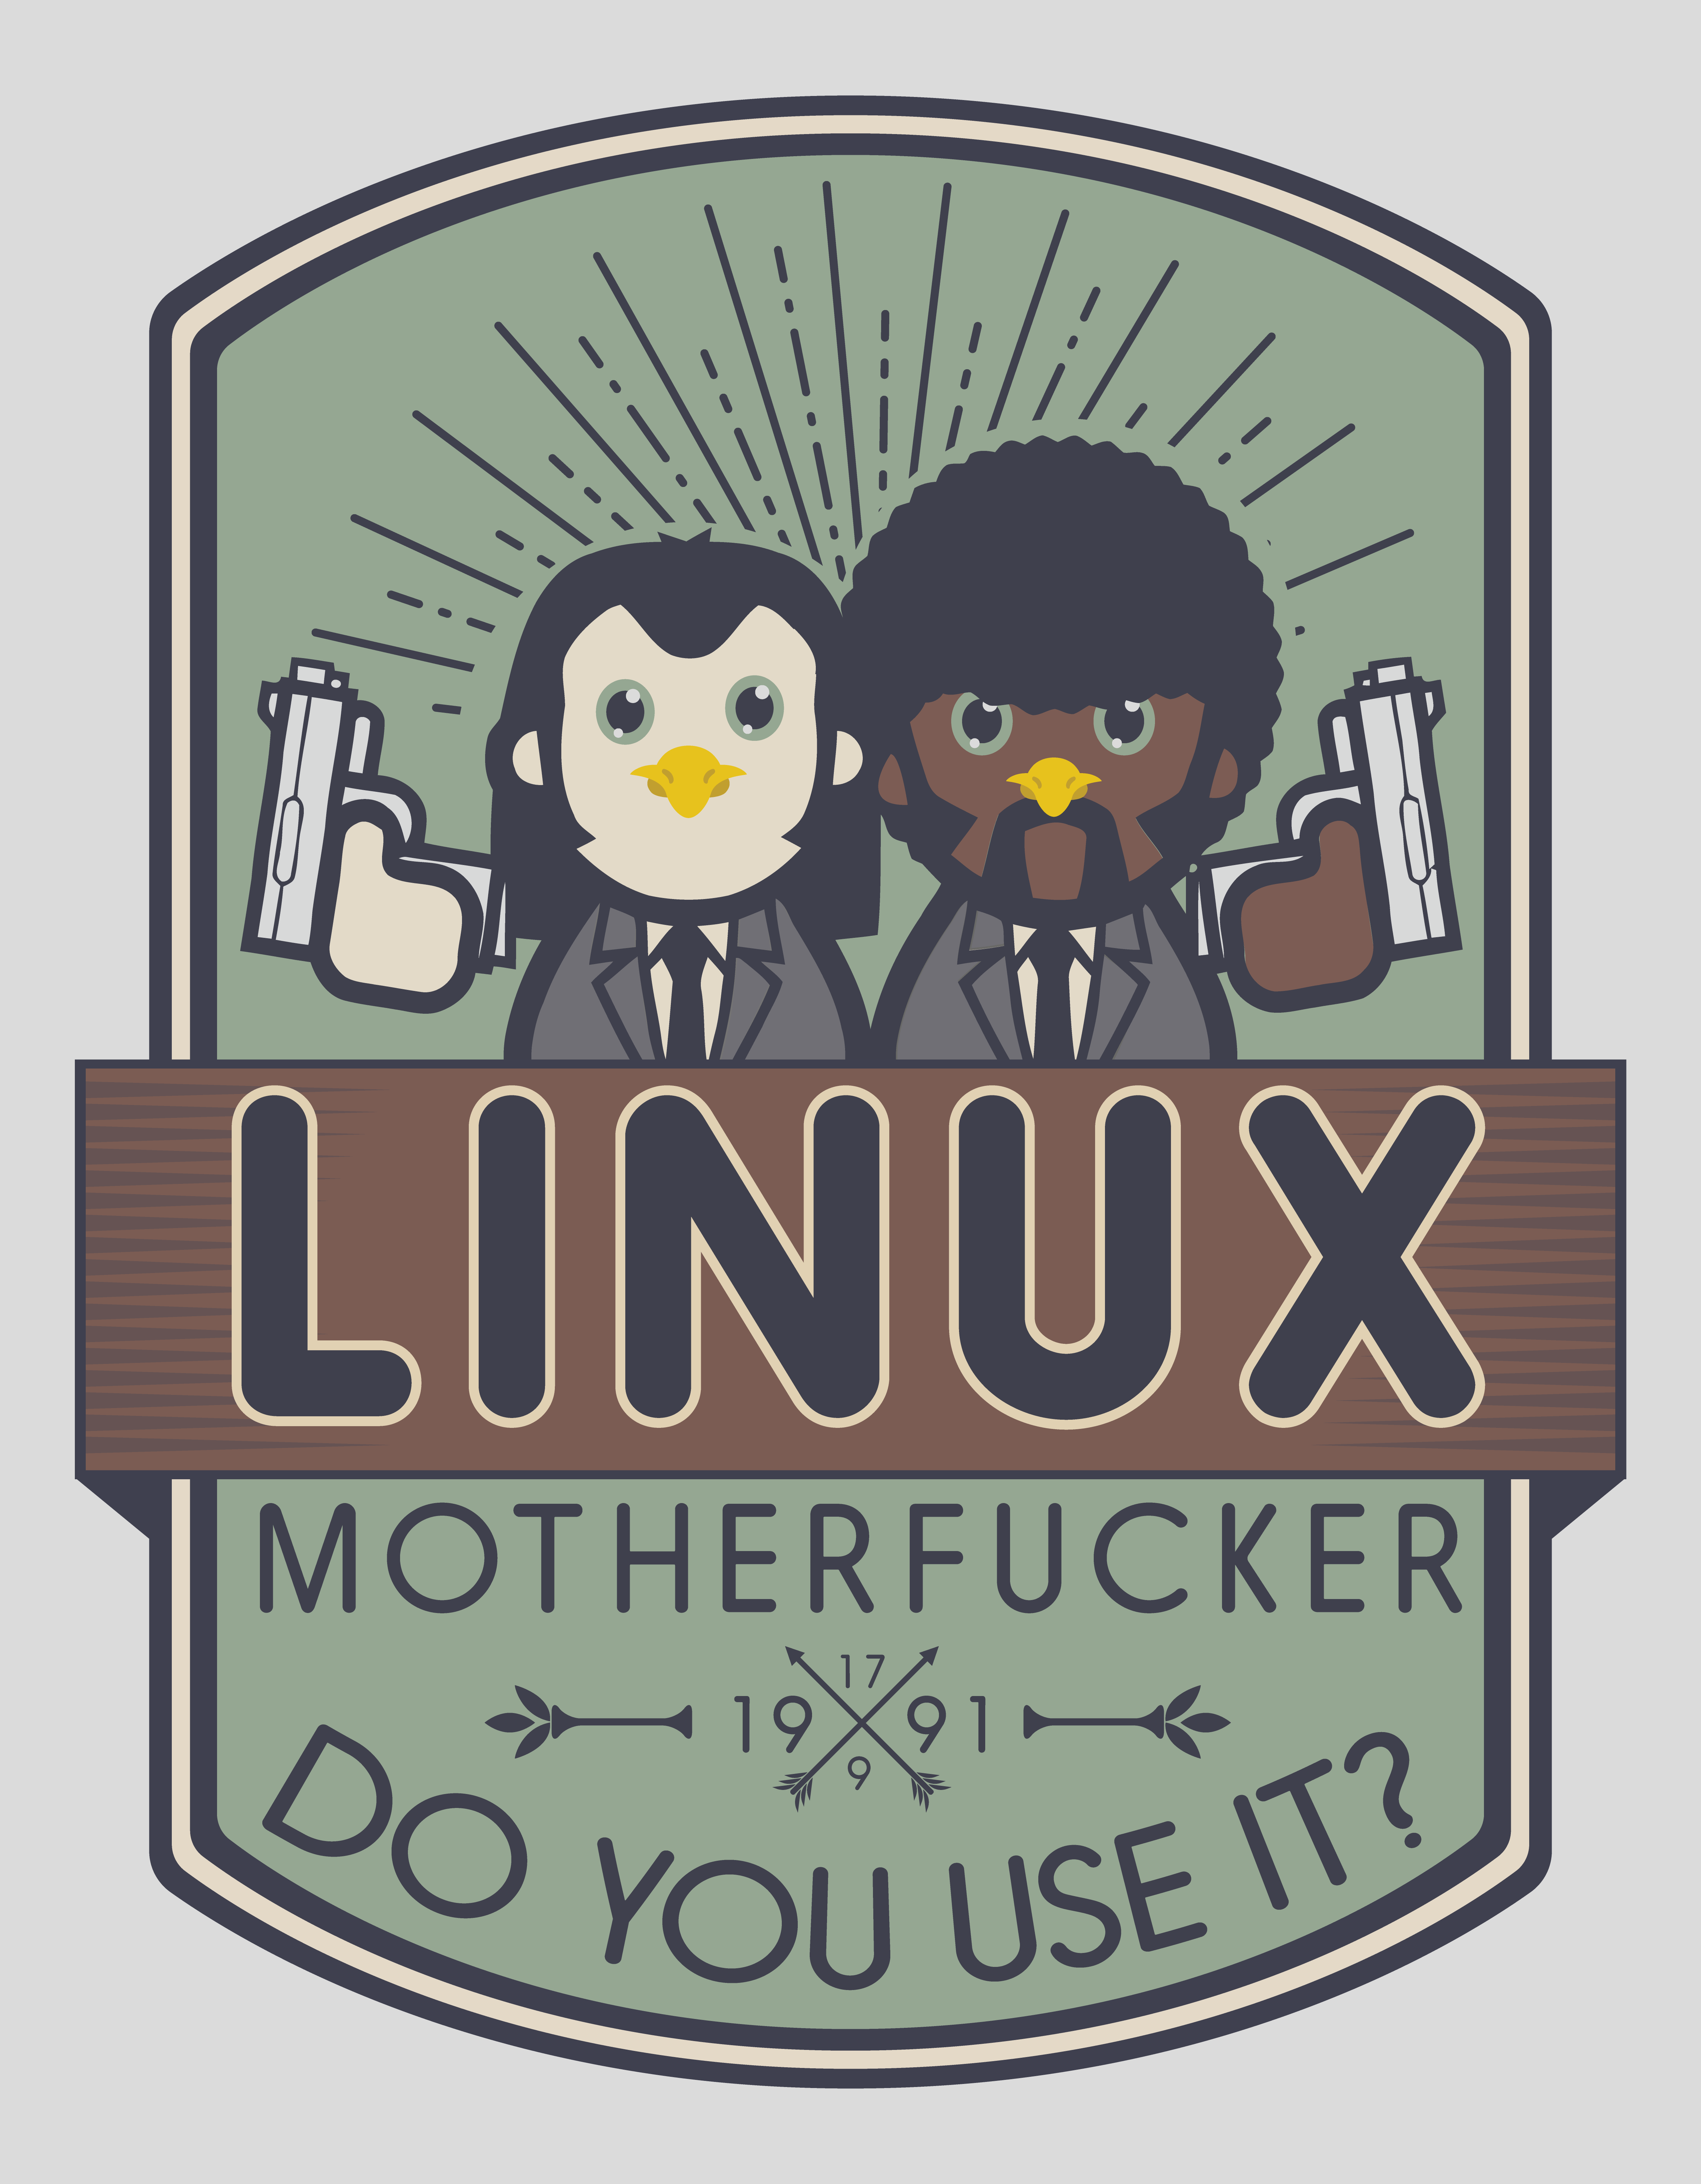 General 5000x6418 Linux Pulp Fiction text crossover Tux operating system